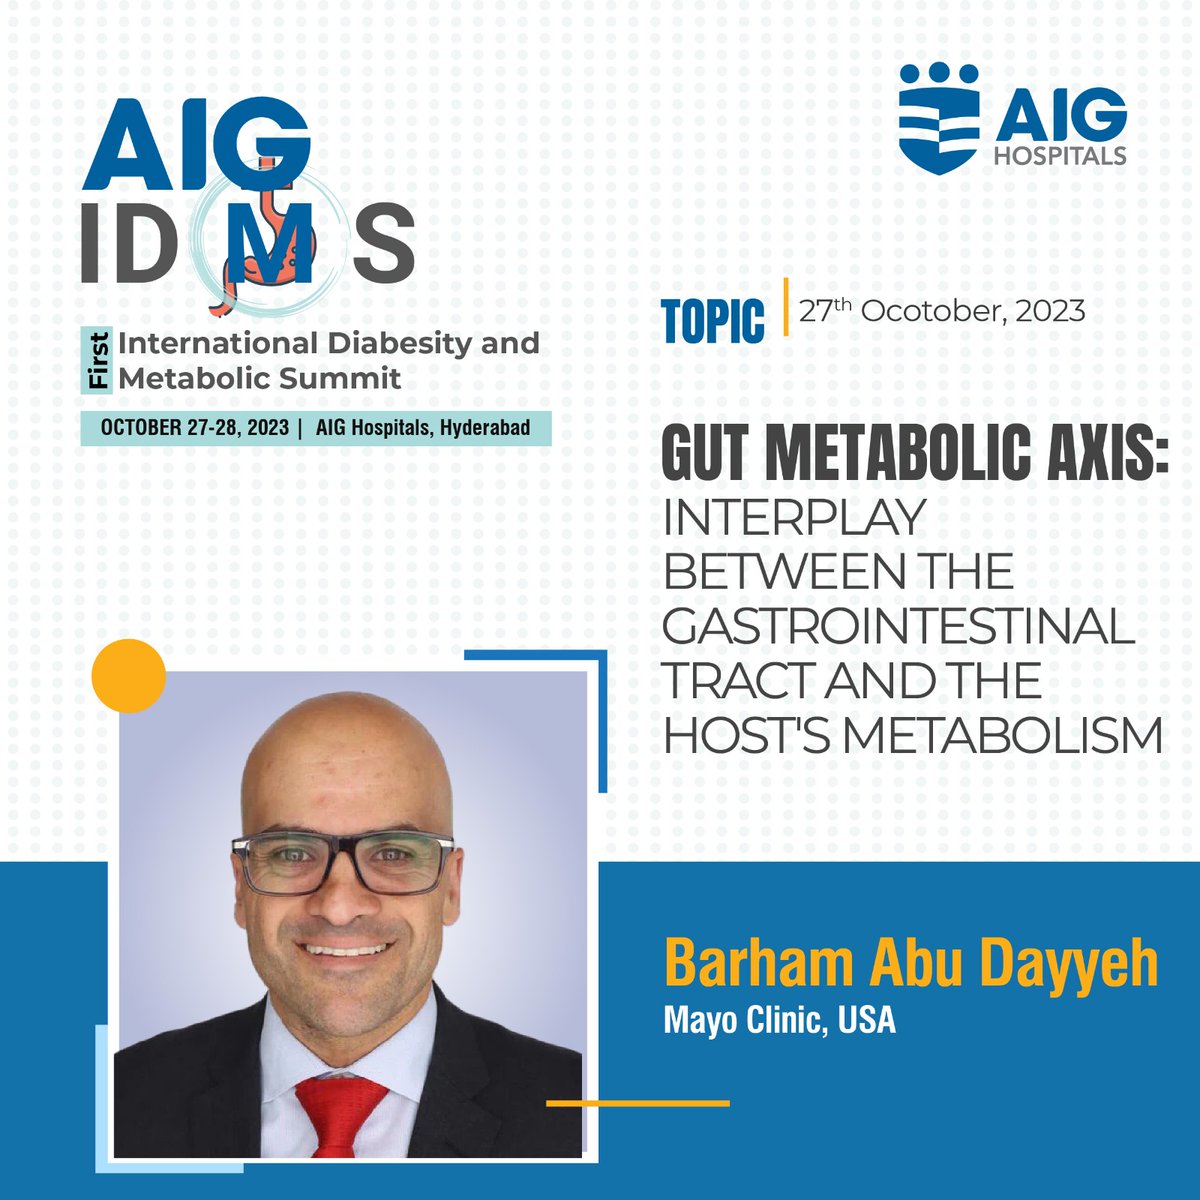 The experts of metabolic health are coming for the AIG #IDMS, a unique summit meant for dealing with #Diabetes, #Obesity and other related metabolic disorders. If you are a #Physician, #Gastroenterologist, #BariatricSurgeon, #Endoscrinologist, or a #Nutritionist, this the place…